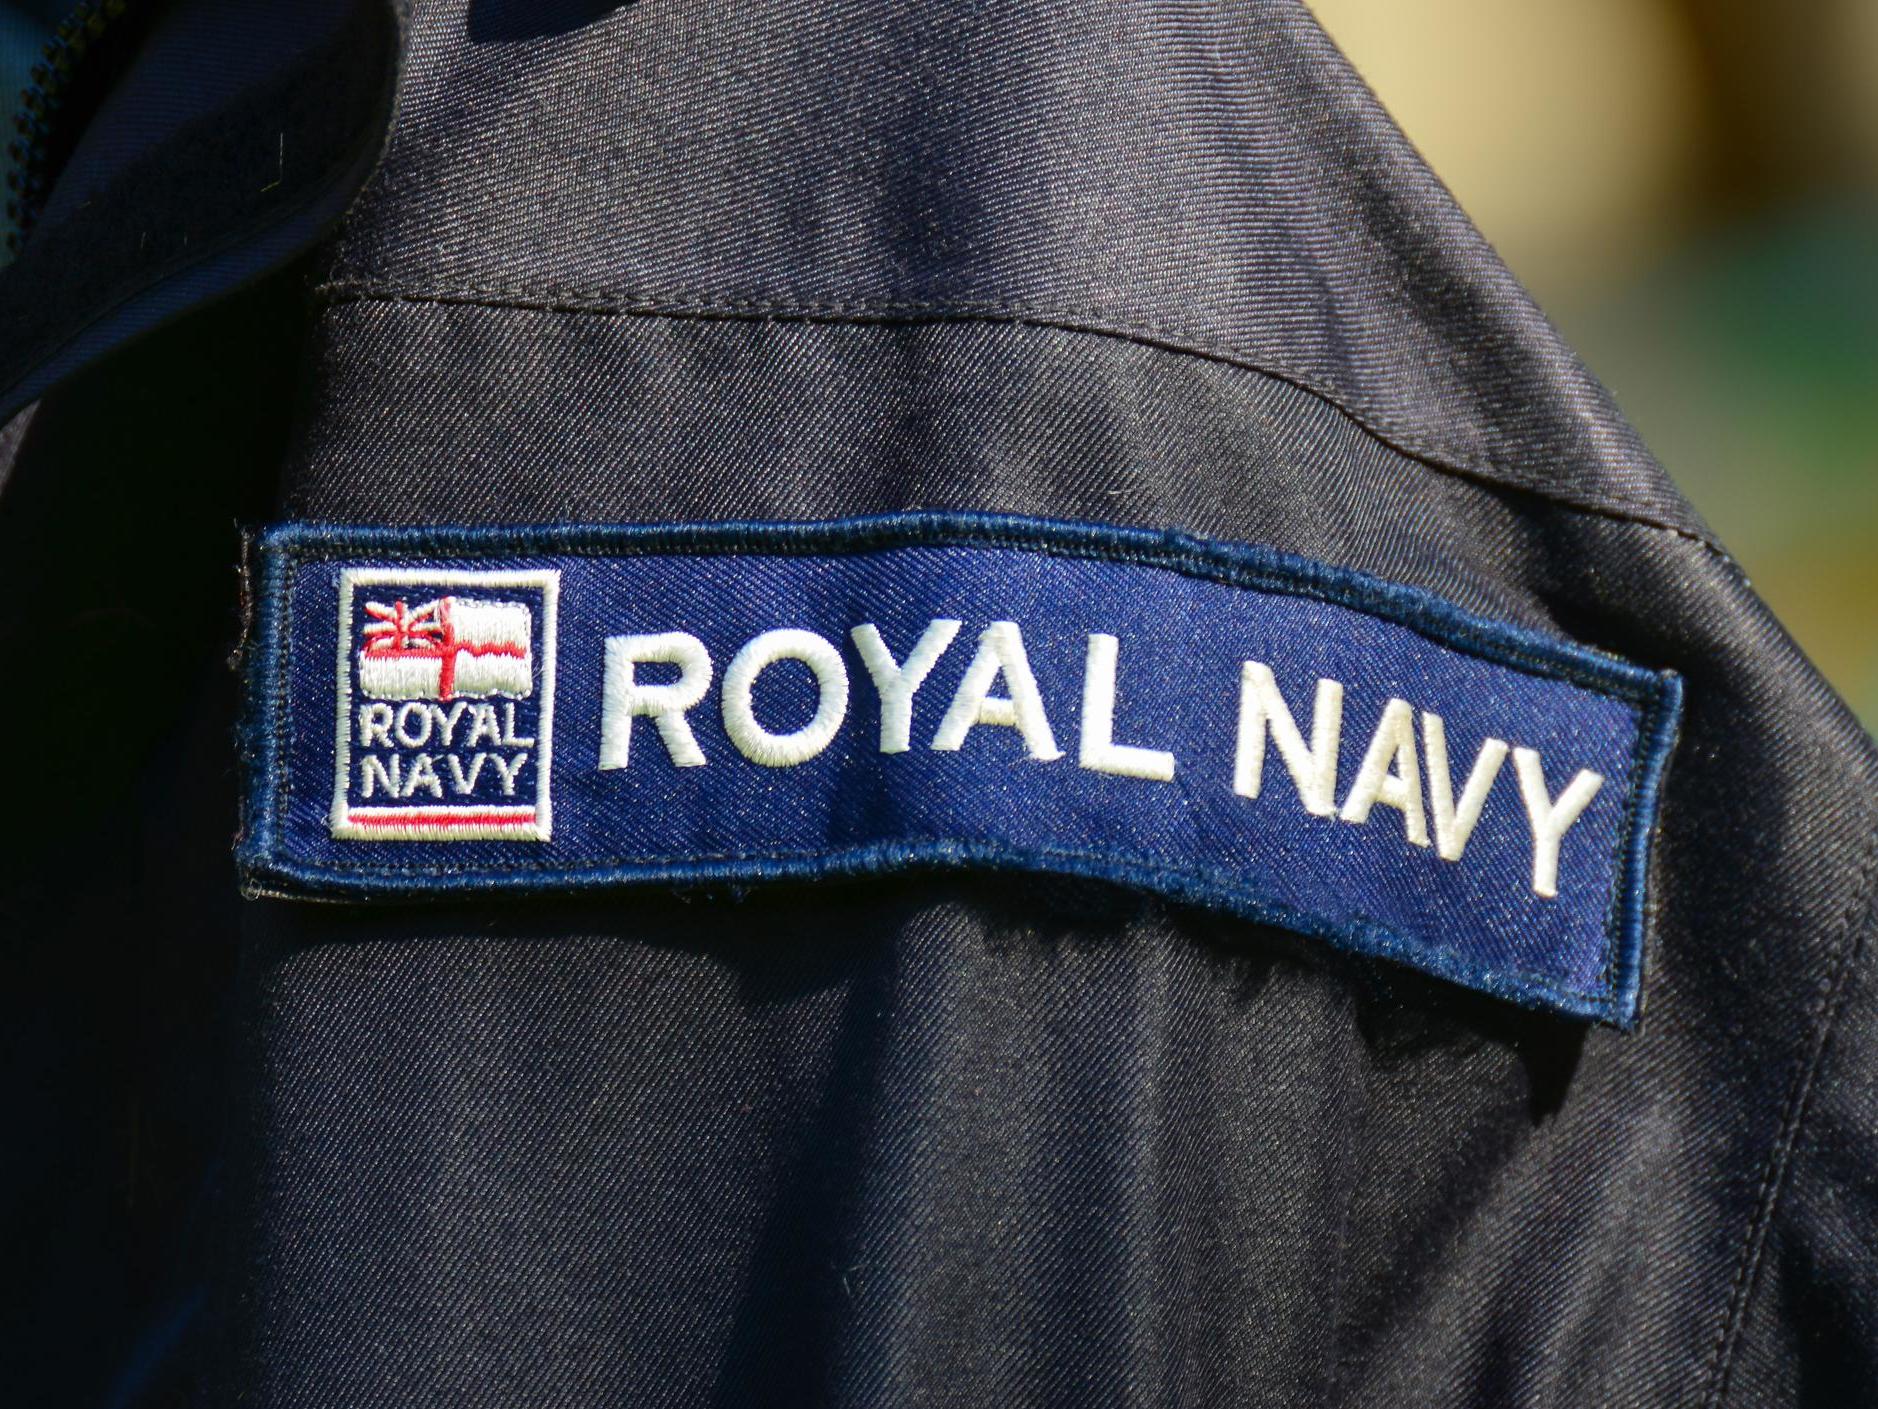 Royal Navy HQ partly shutdown after Legionella bacteria found in water system